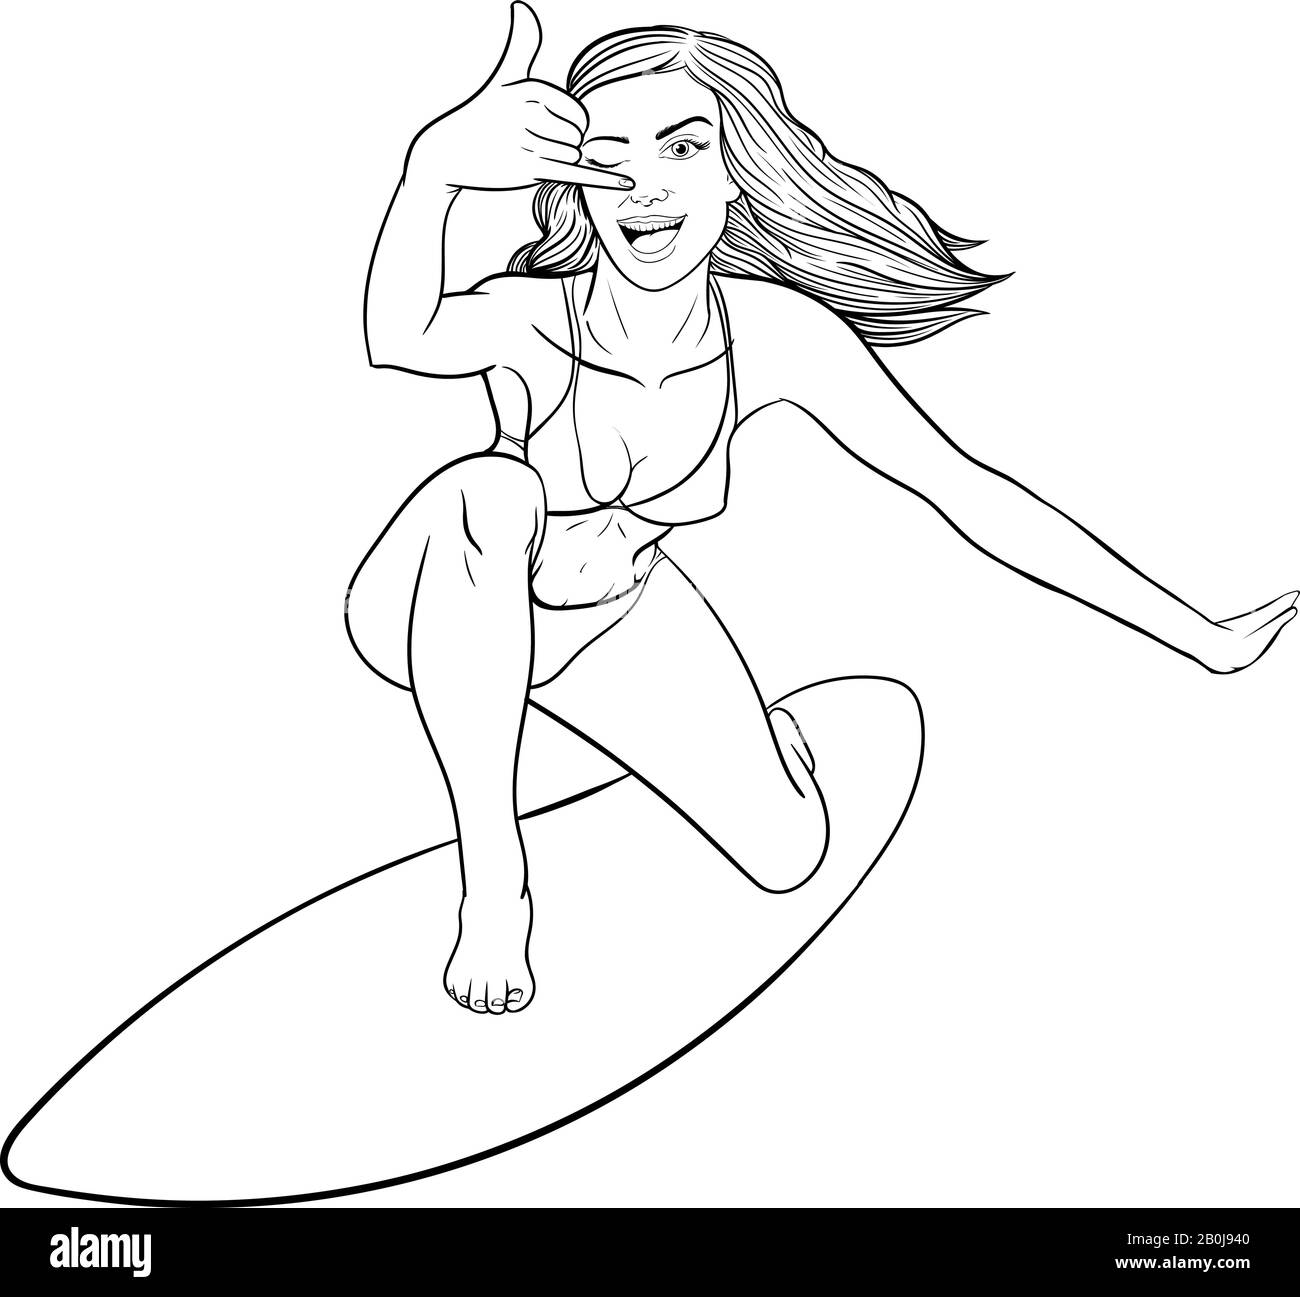 Young Surf Girl With Surfboard Riding A Wave Cartoon Vector